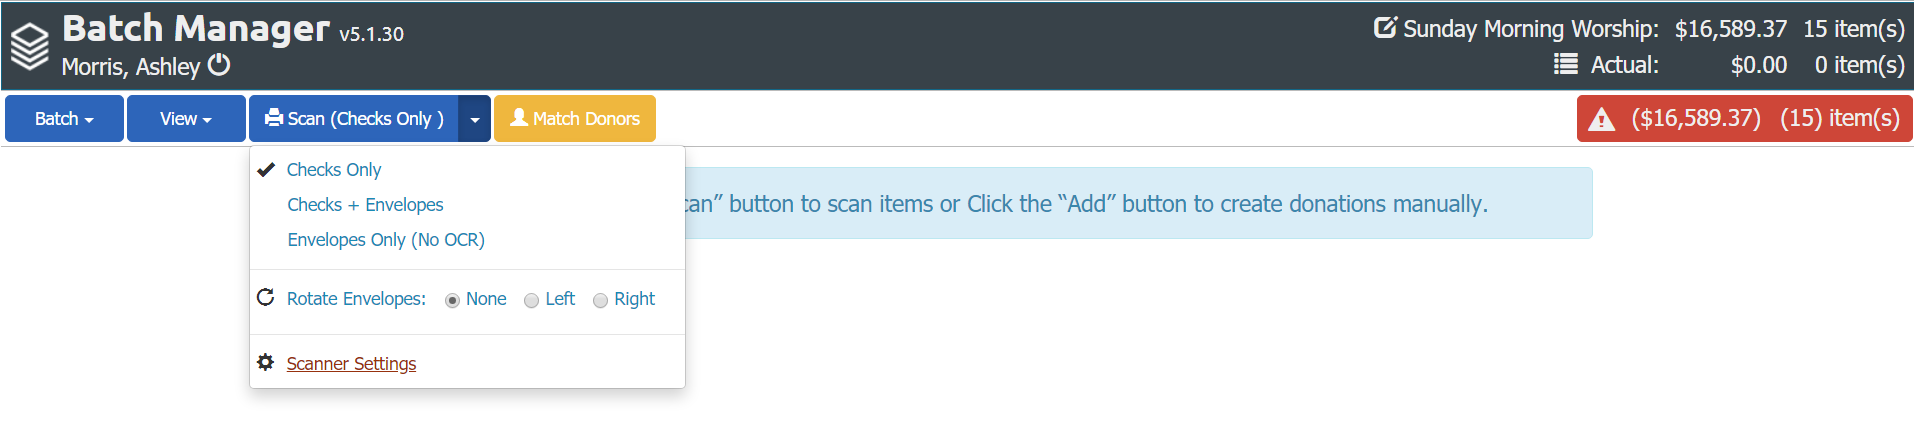 Image displaying the Batch Manager Tool, with the Scan (Checks Only) button open showing a drop-down list.